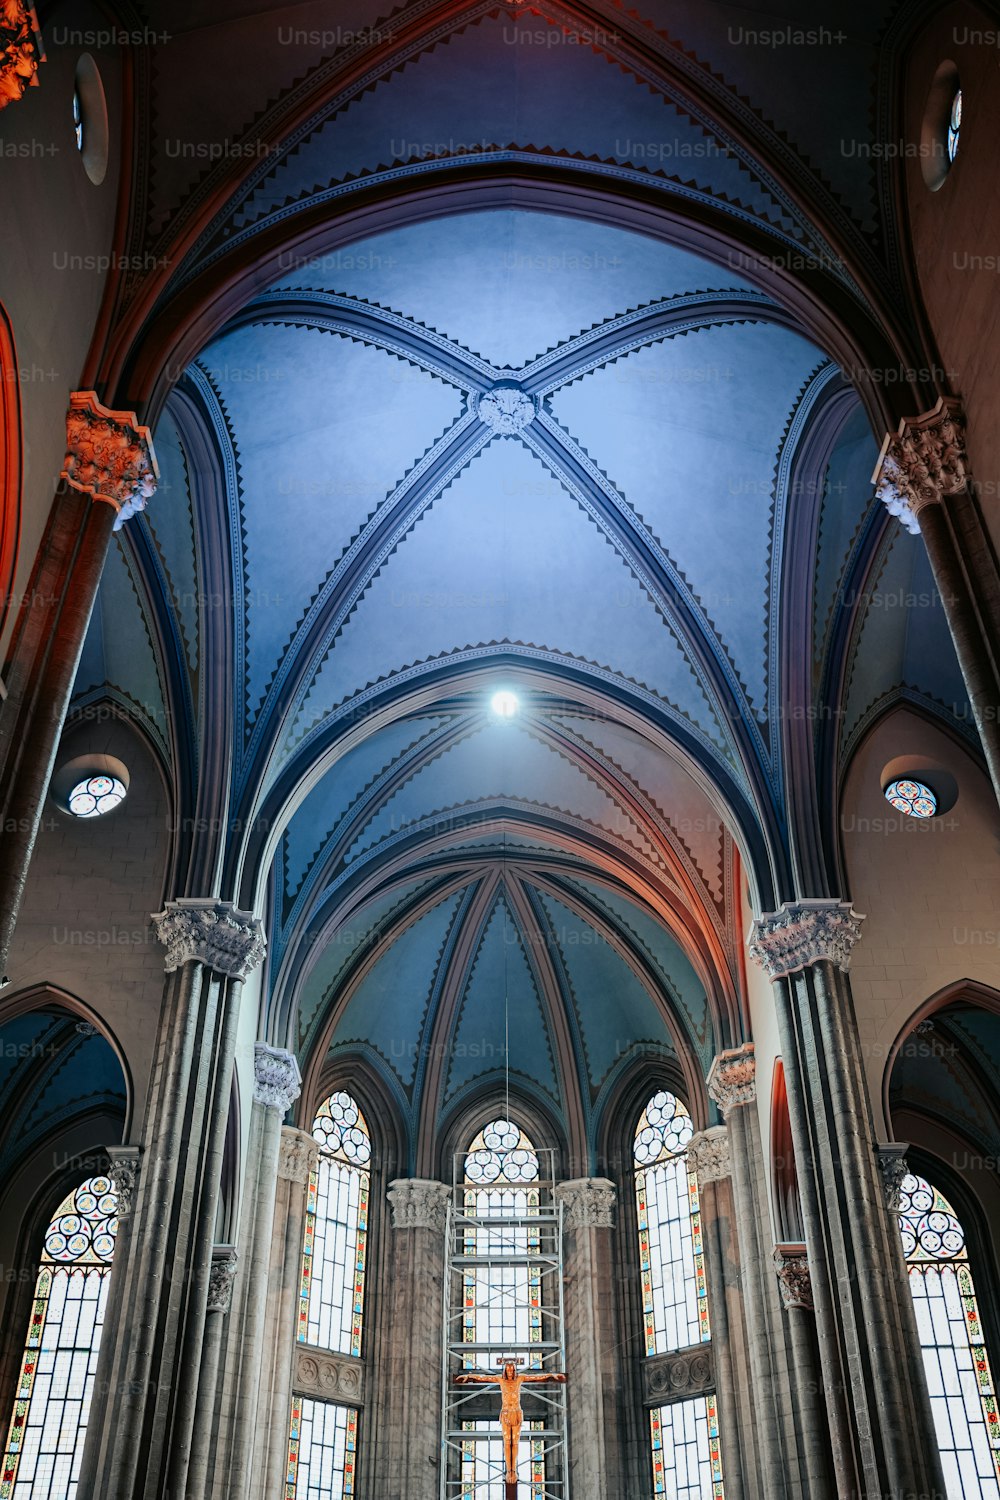 a large cathedral with high vaulted ceilings and stained glass windows